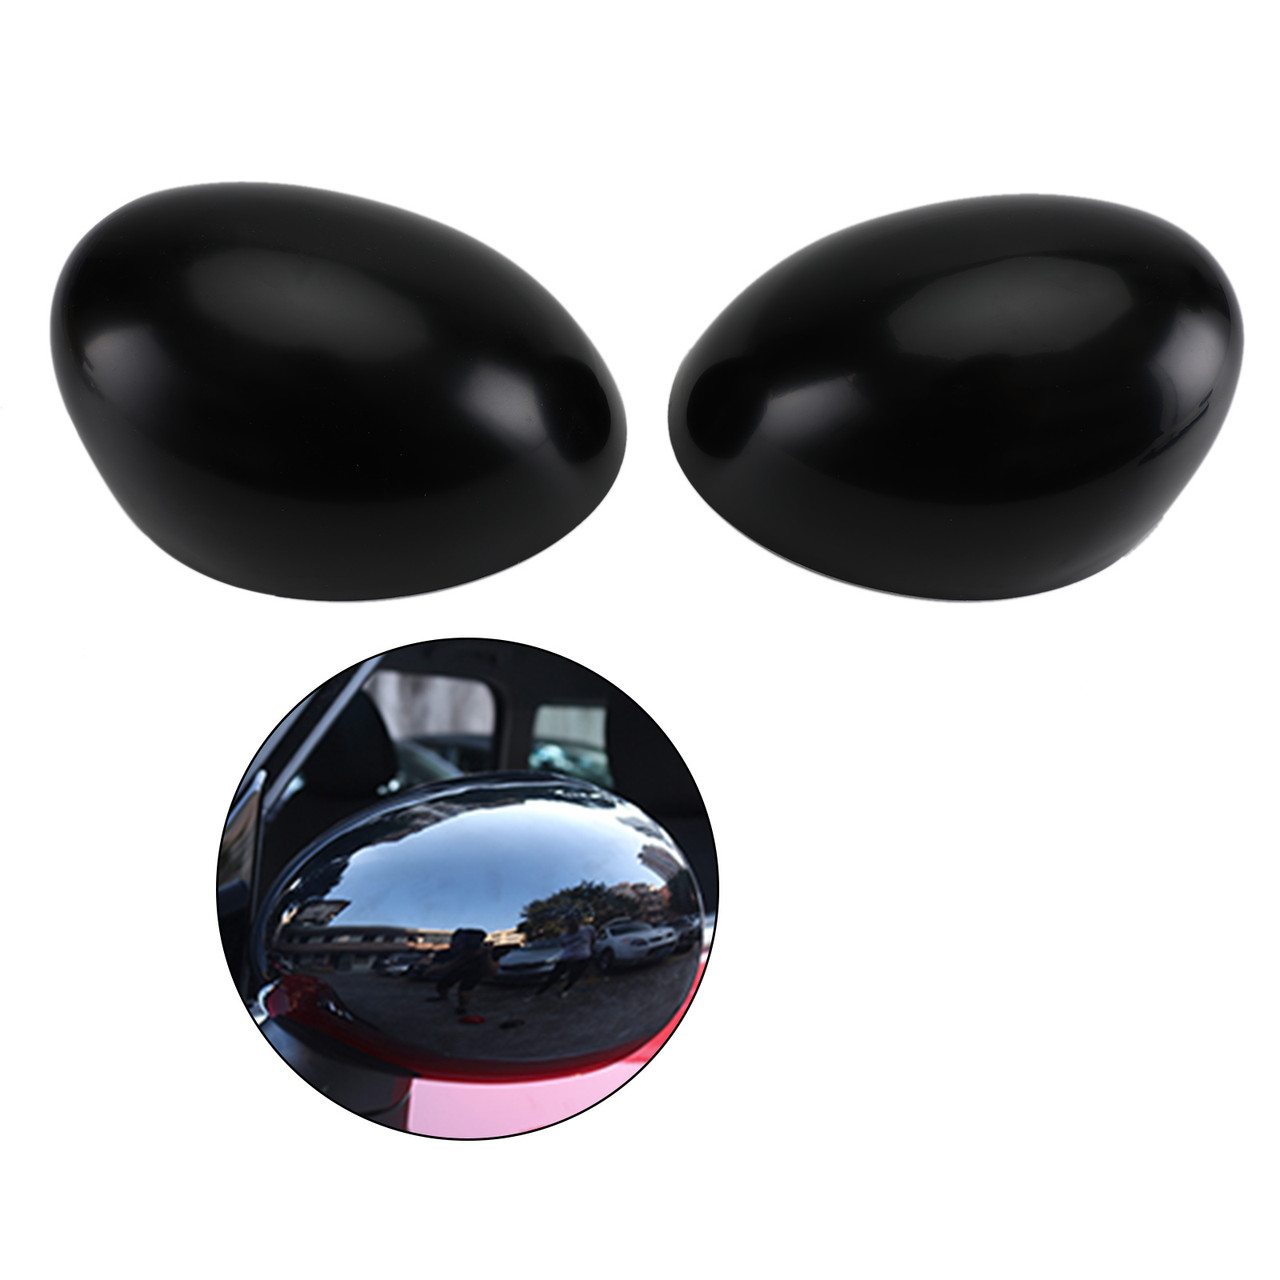 2 x Union Jack WING Mirror Covers Fit for Mini Cooper R55 R56 R57 Power Fold Mirror Black